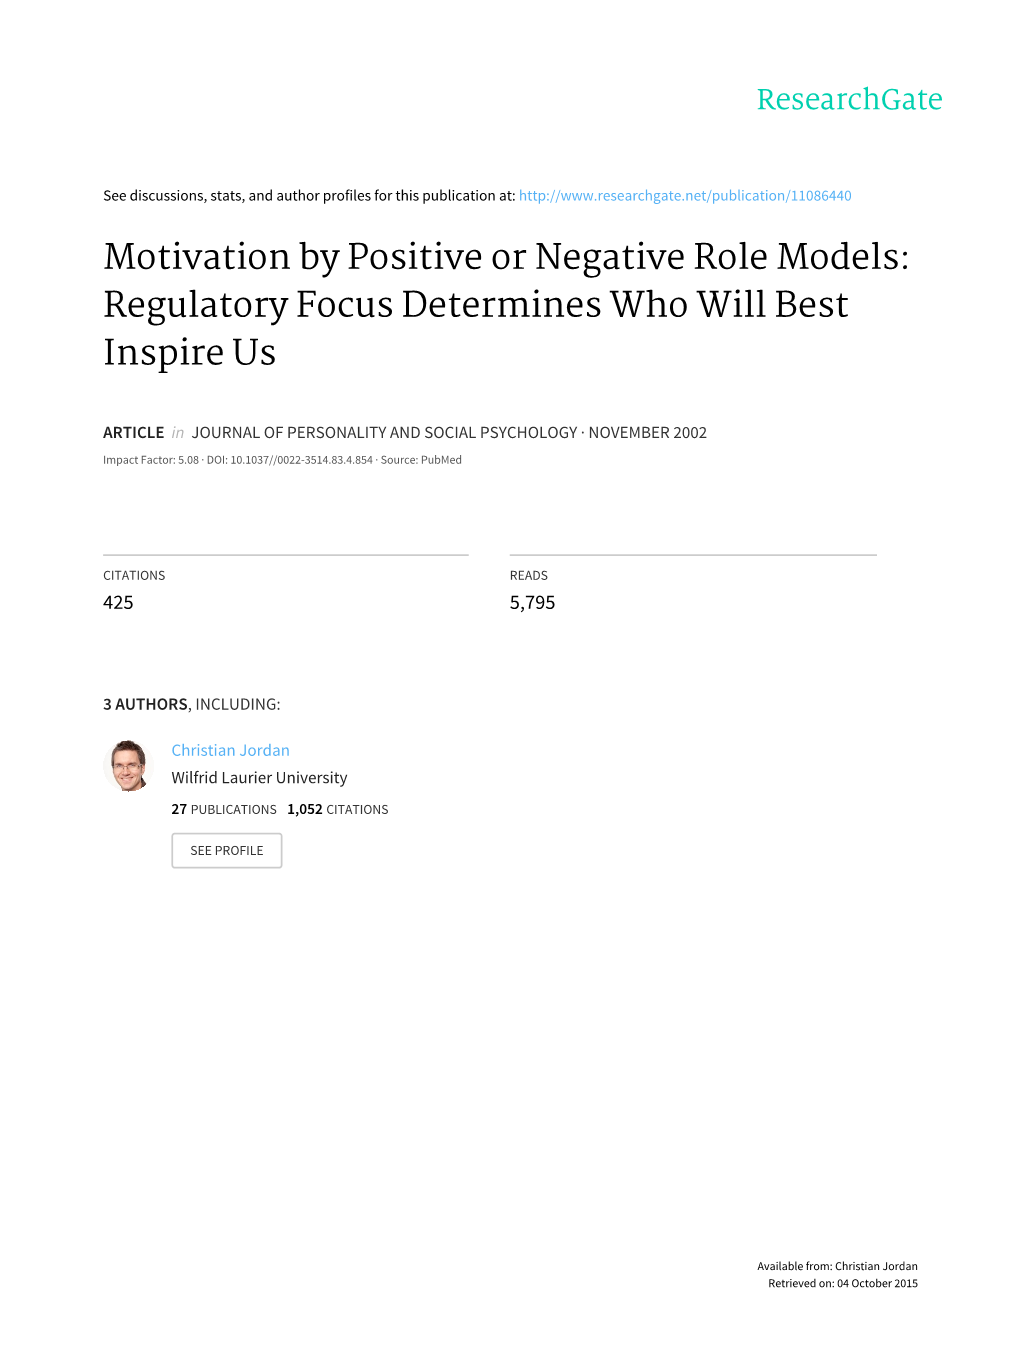 Motivation by Positive Or Negative Role Models: Regulatory Focus Determines Who Will Best Inspire Us